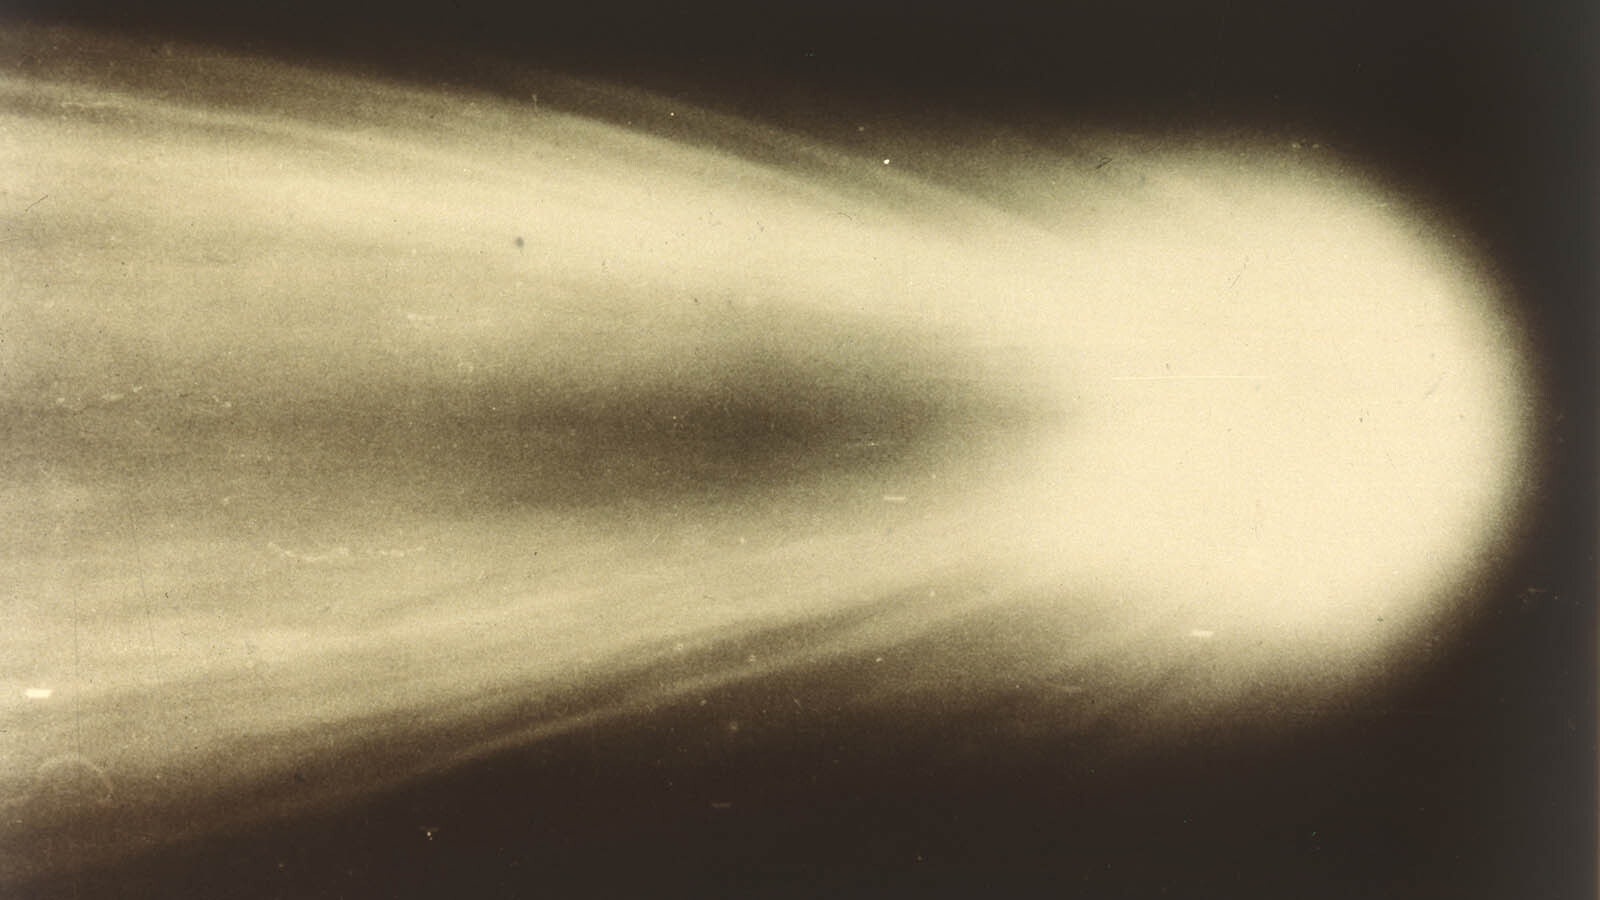 Halley's Comet on May 8, 1910. The head of Halley's Comet as photographed by Dr. George Willis Ritchey using the 60-inch telescope at Mount Wilson Observatory, California. Halley's Comet is visible from Earth every 75-76 years. It is the only known short-period comet that is regularly visible to the naked eye, and the only naked-eye comet that might appear twice in a human lifetime. Halley last appeared in the inner parts of the Solar System in 1986 and will next appear in mid-2061.